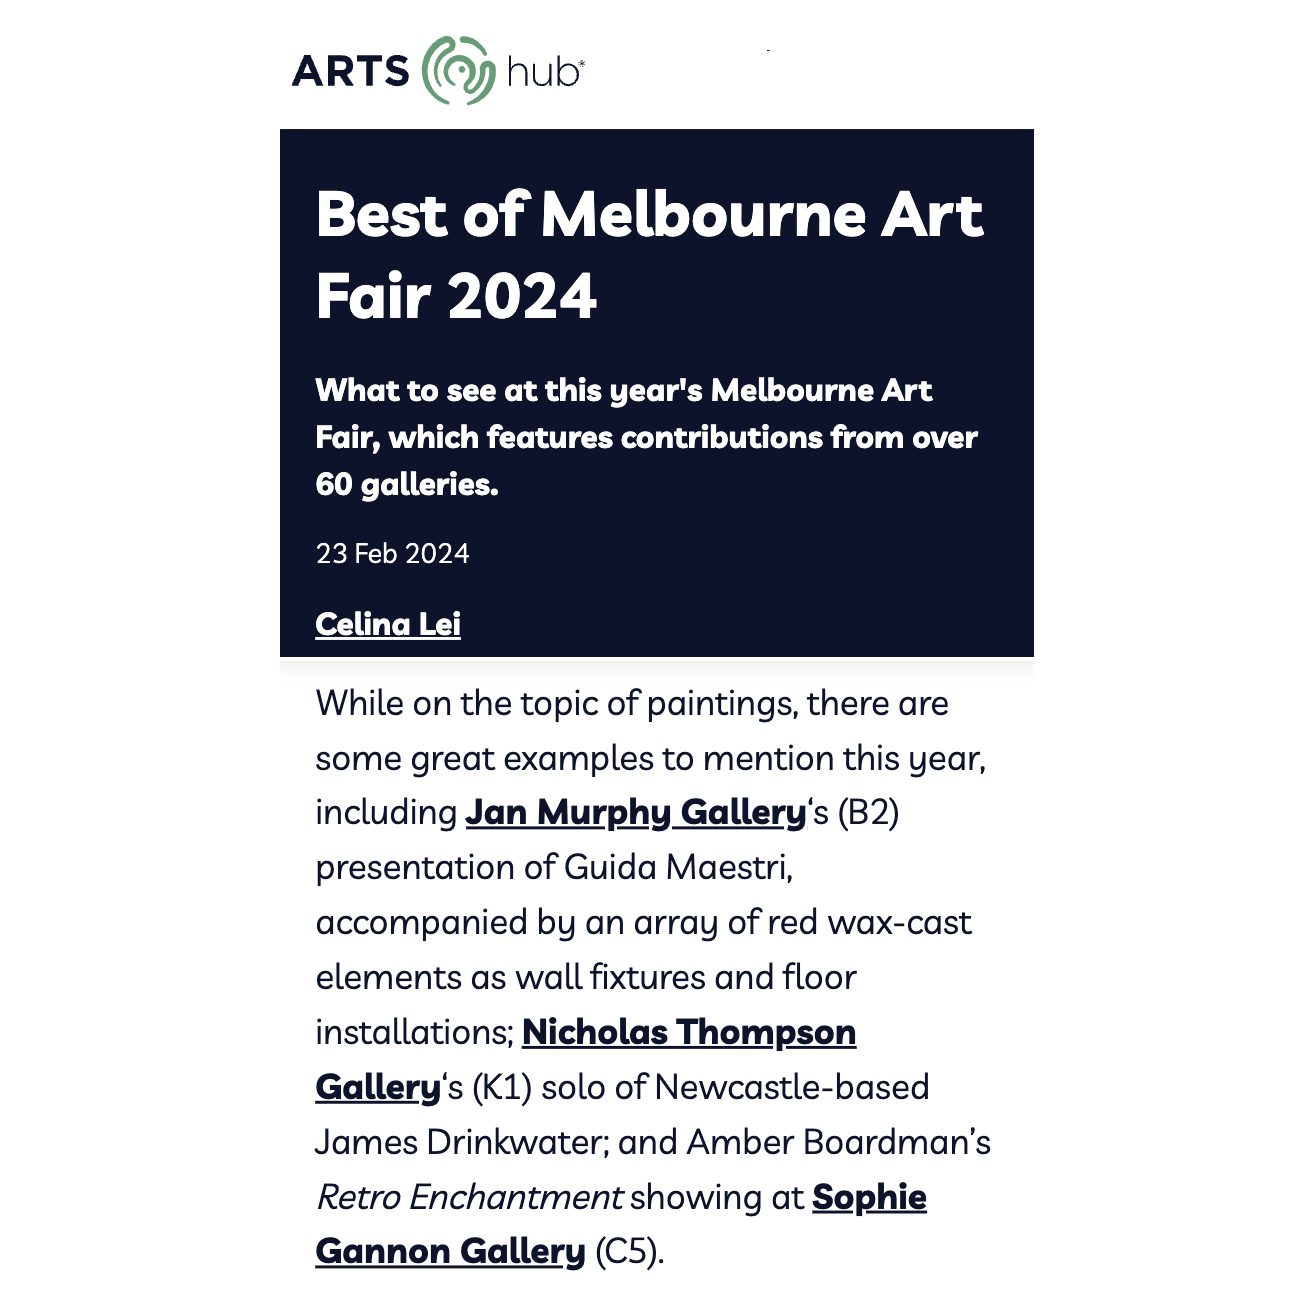 JAMES DRINKWATER IN ART GUIDE'S BEST OF THE MELBOURNE ART FAIR 2024